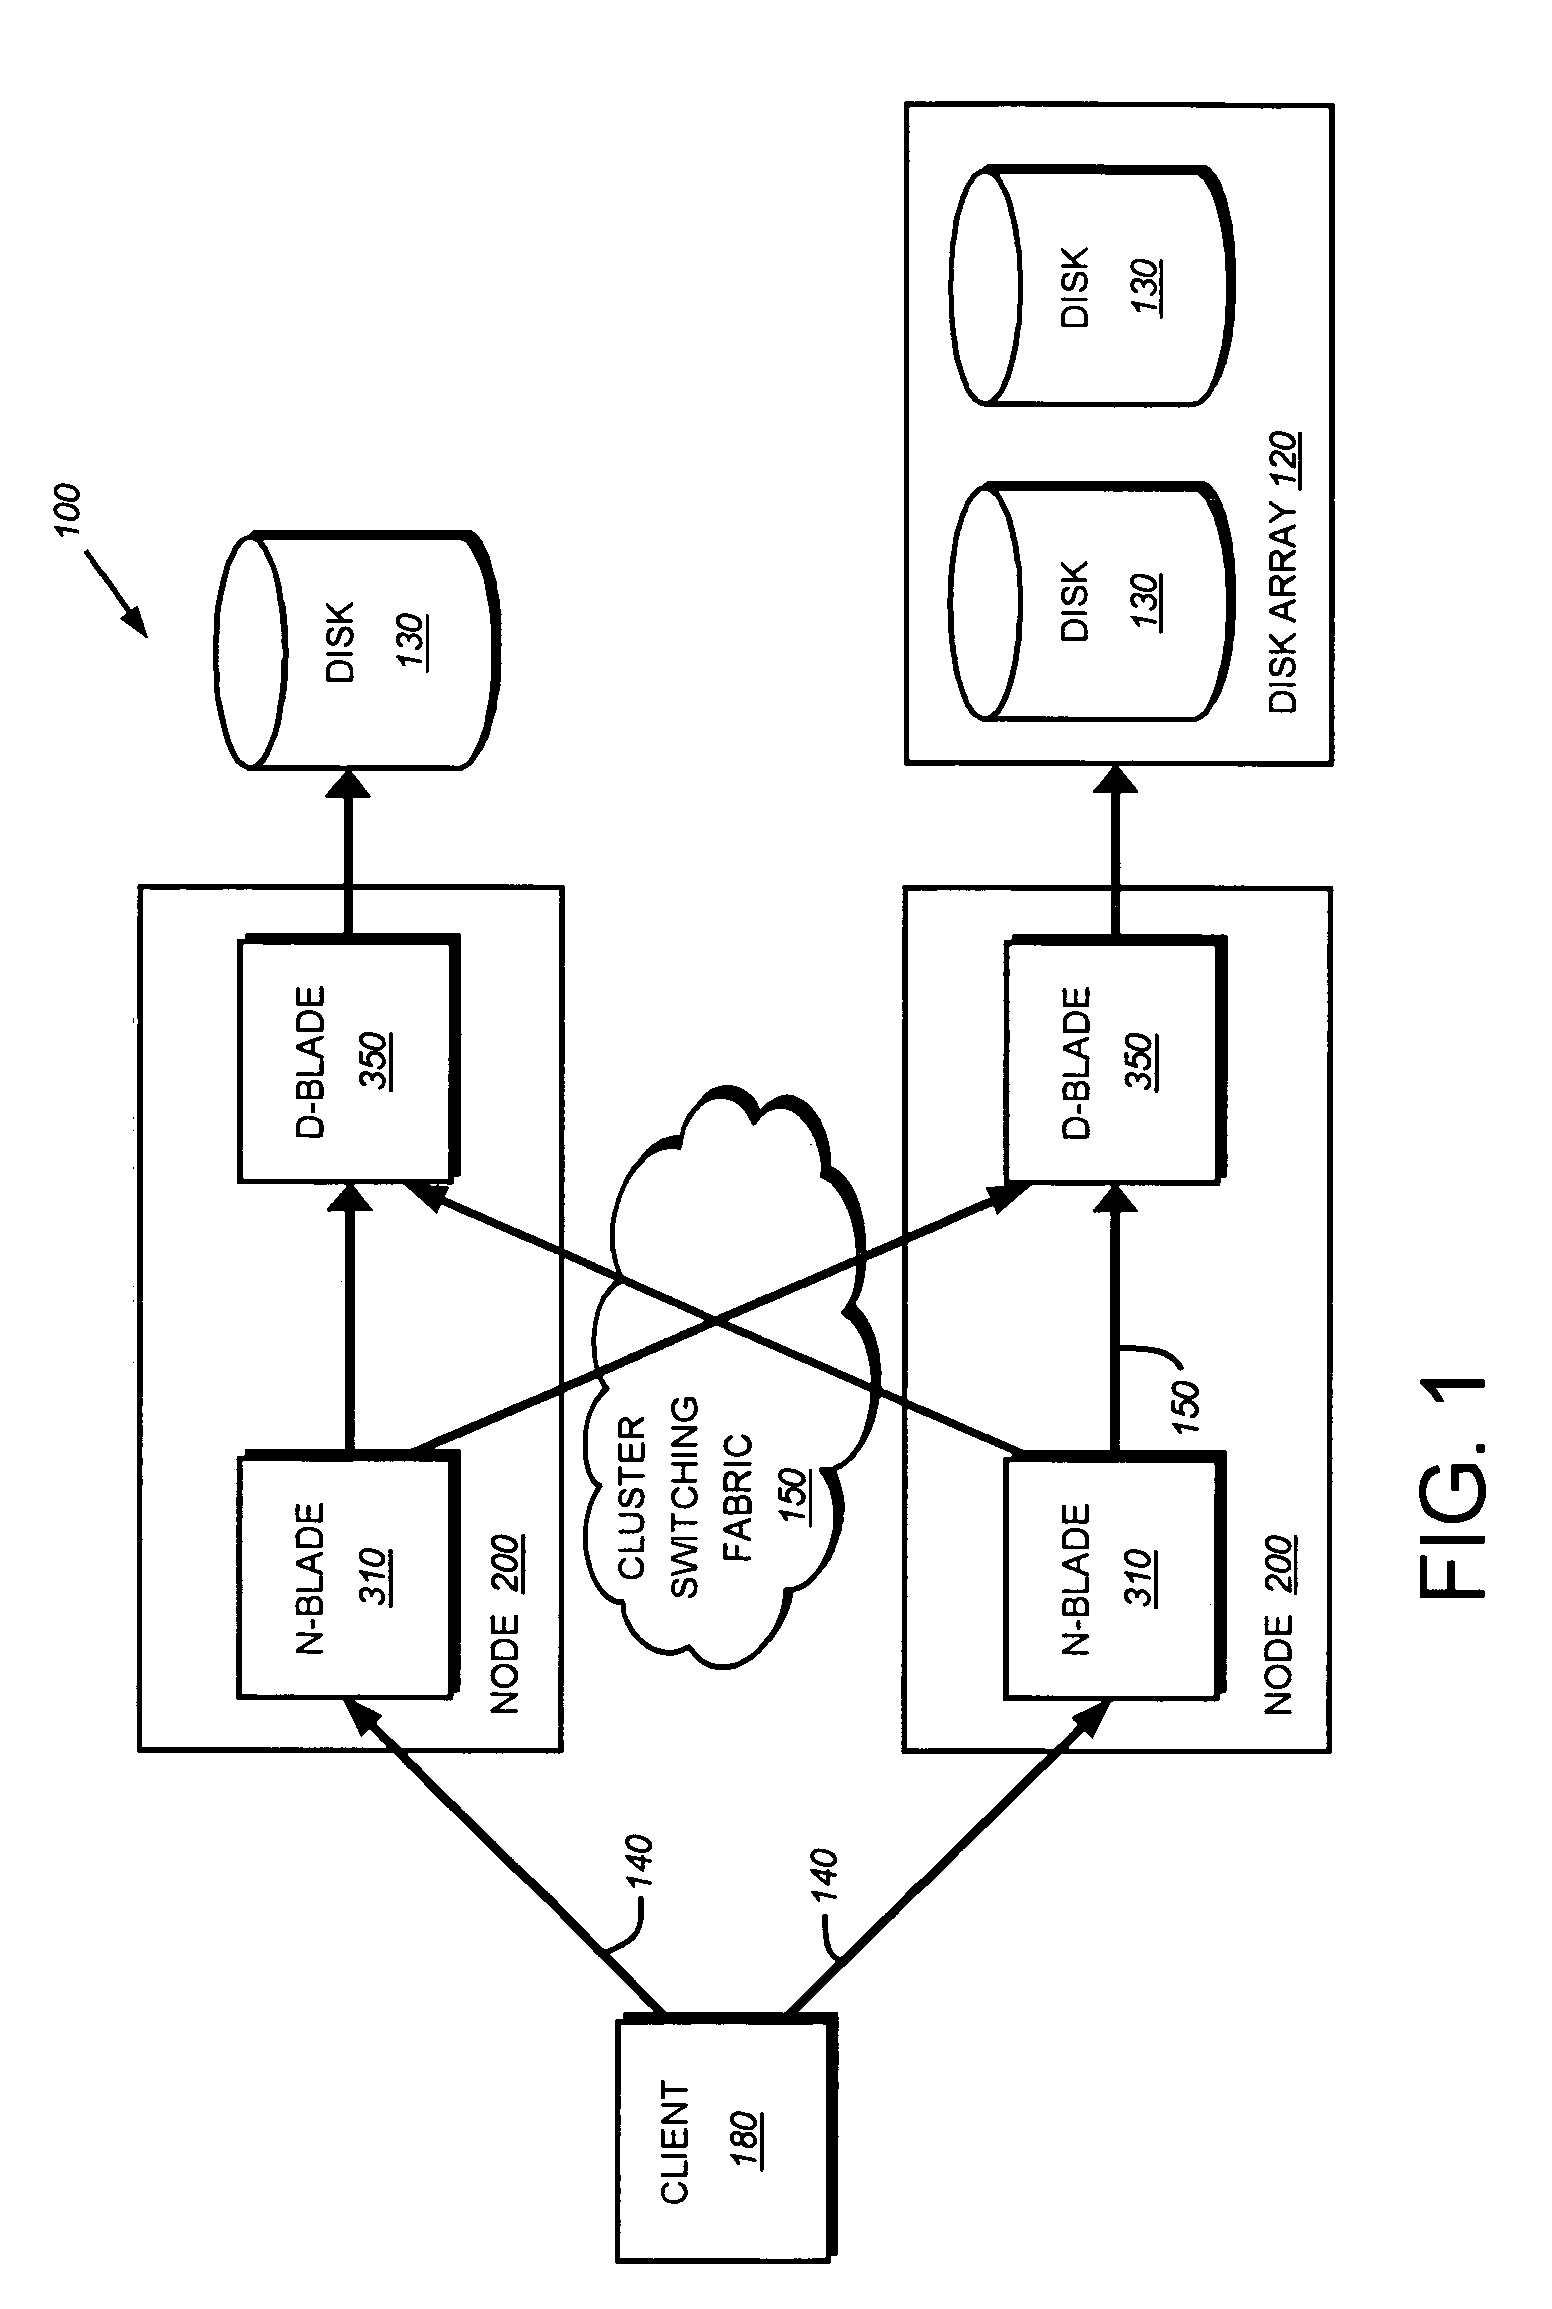 System and method for specifying batch execution ordering of requests in a storage system cluster